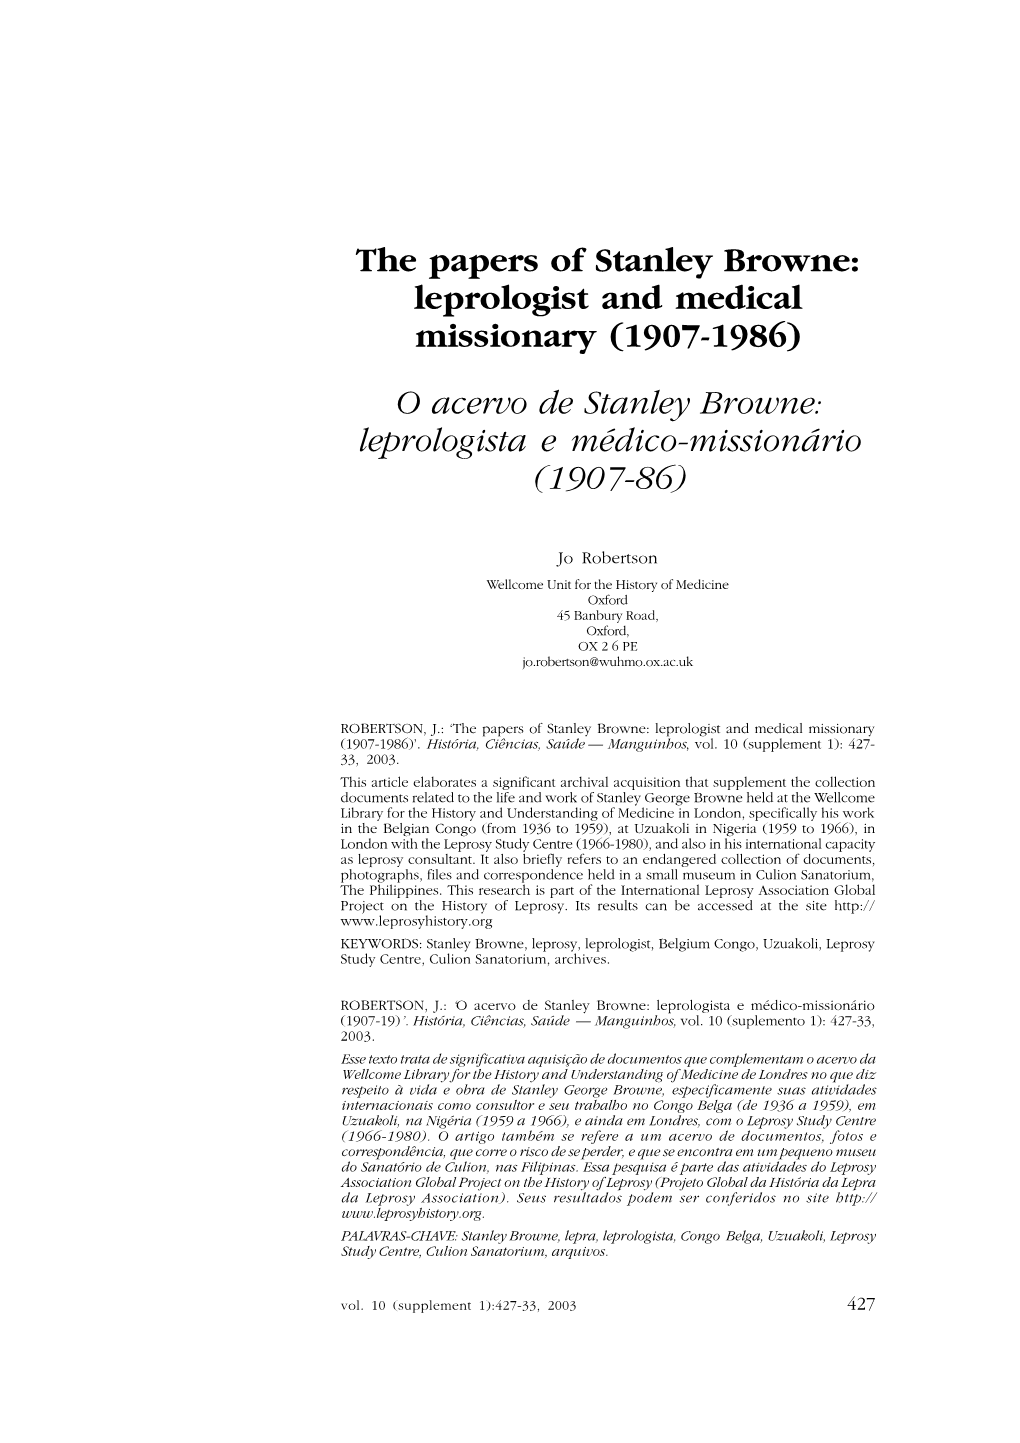 The Papers of Stanley Browne